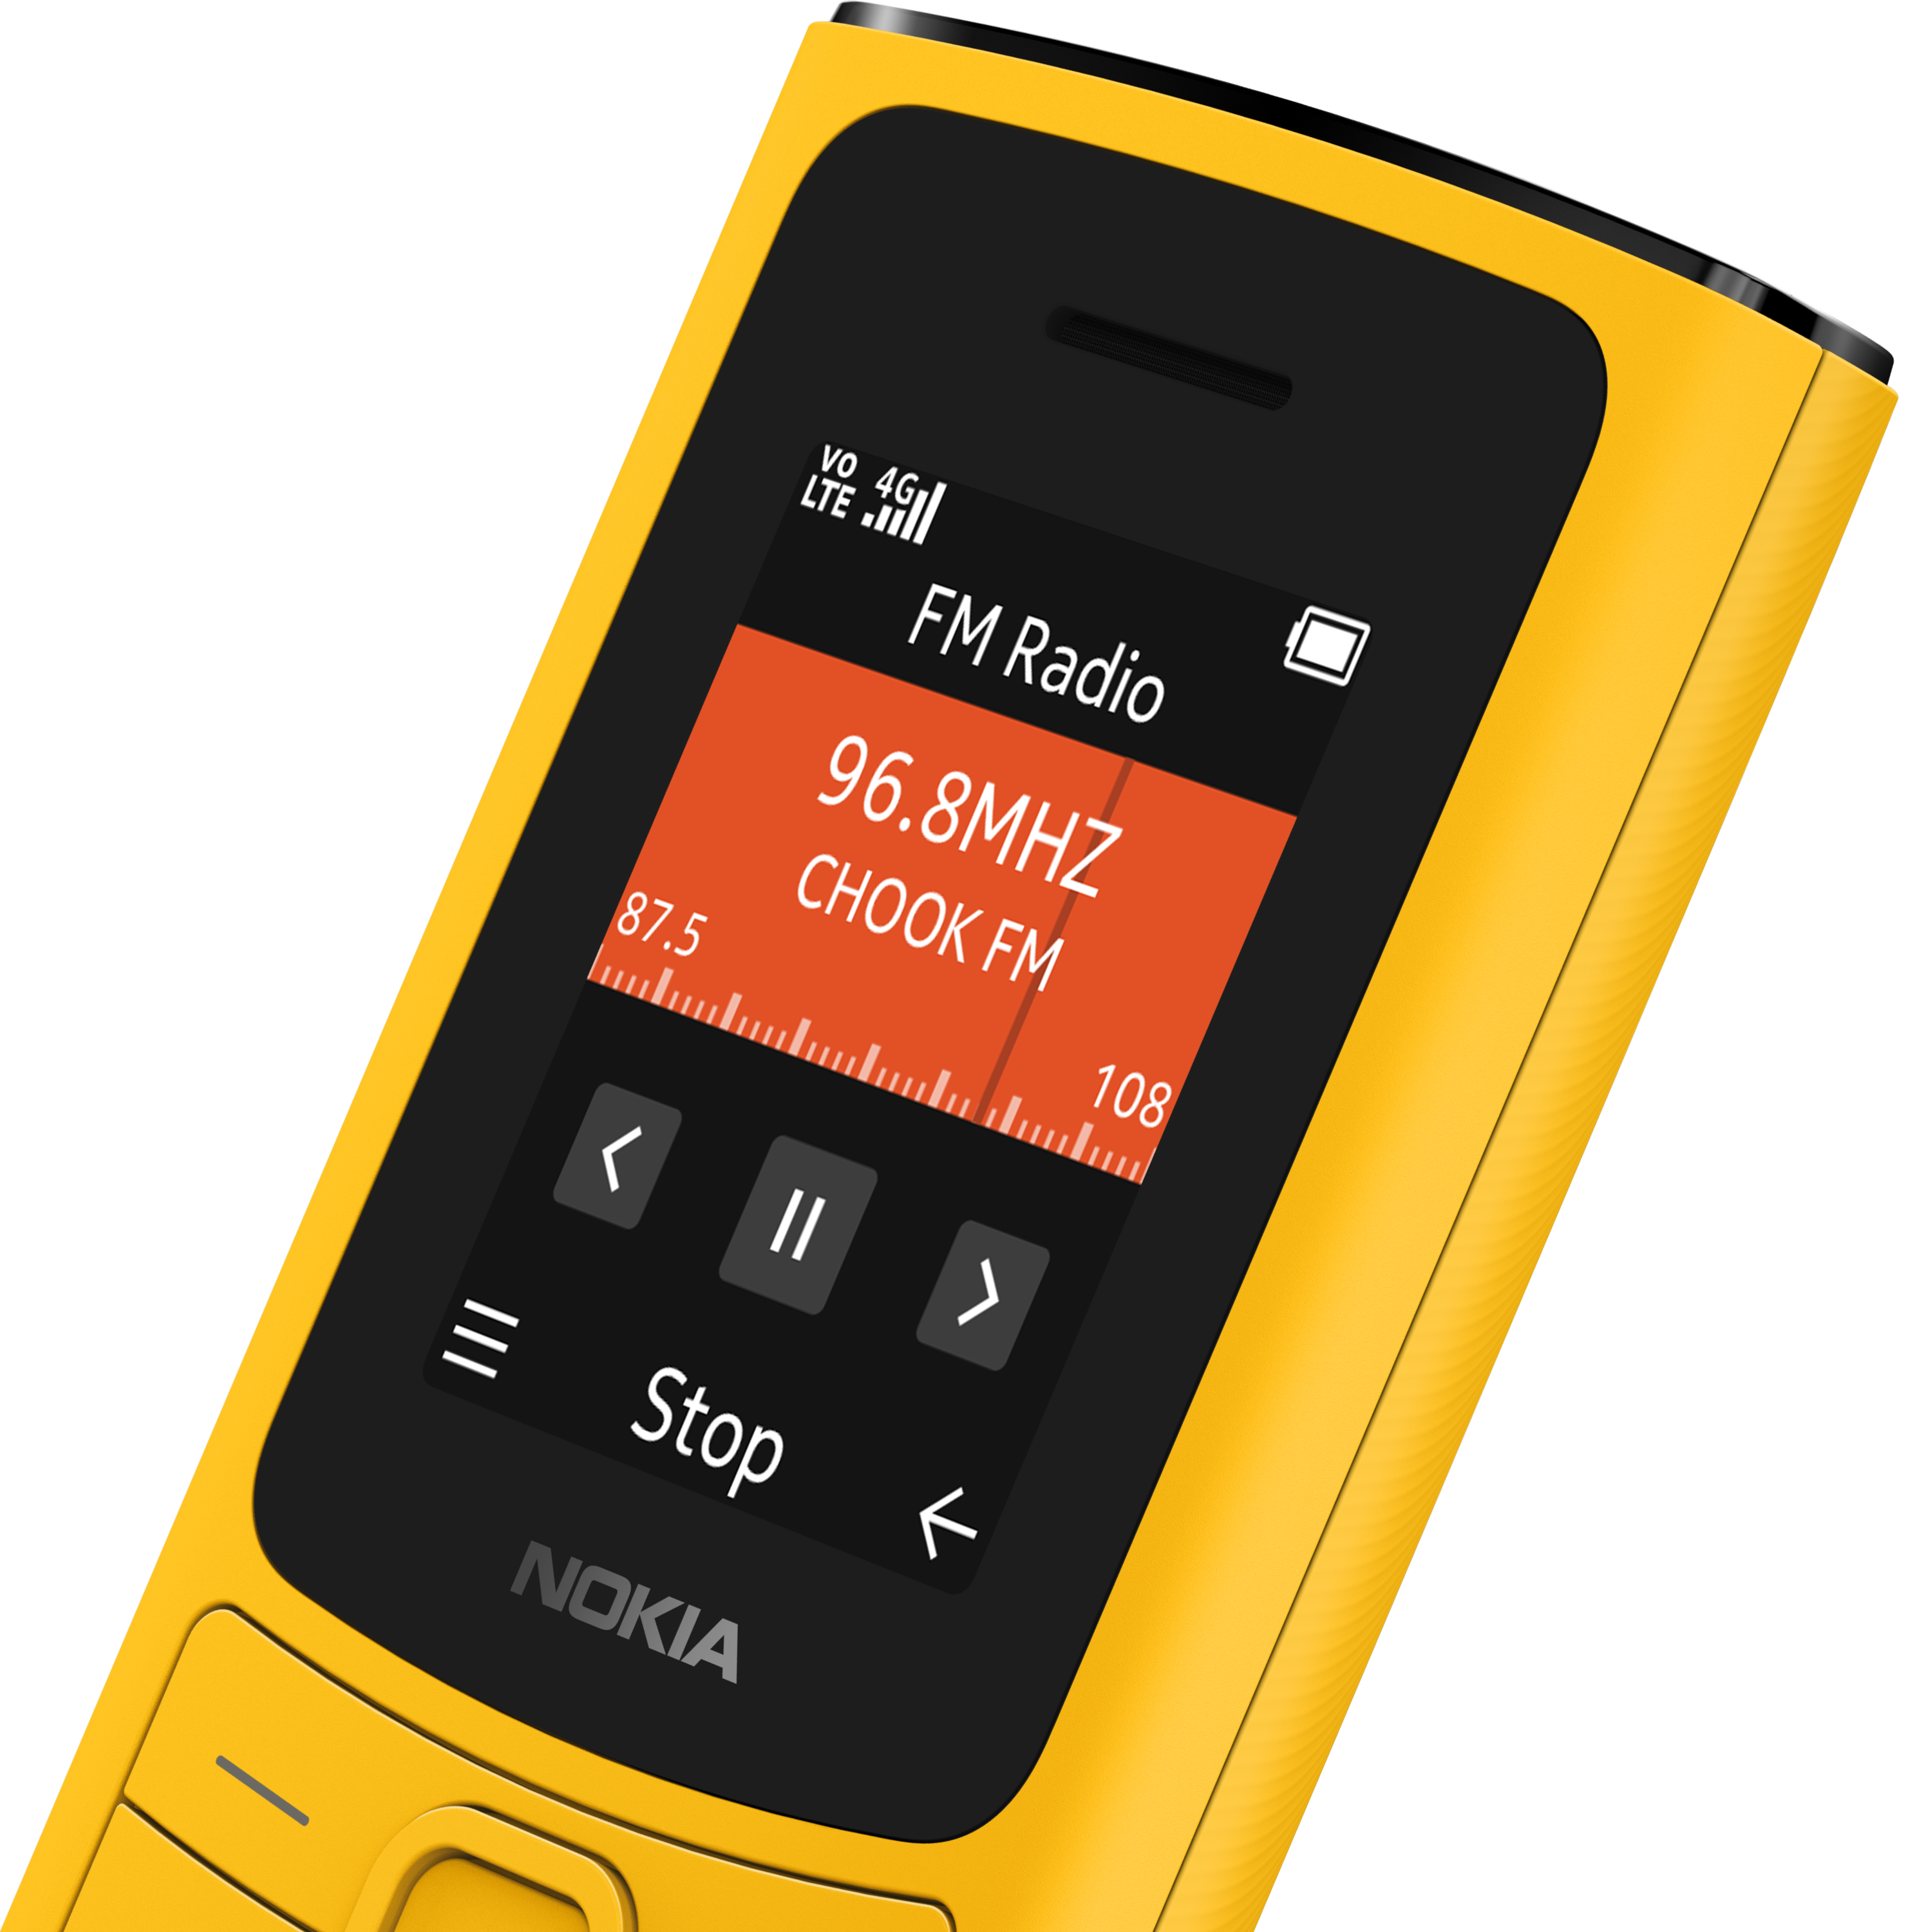 nokia_110_4G-DTC-FEATURES.png?f=center&fit=fill&q=88